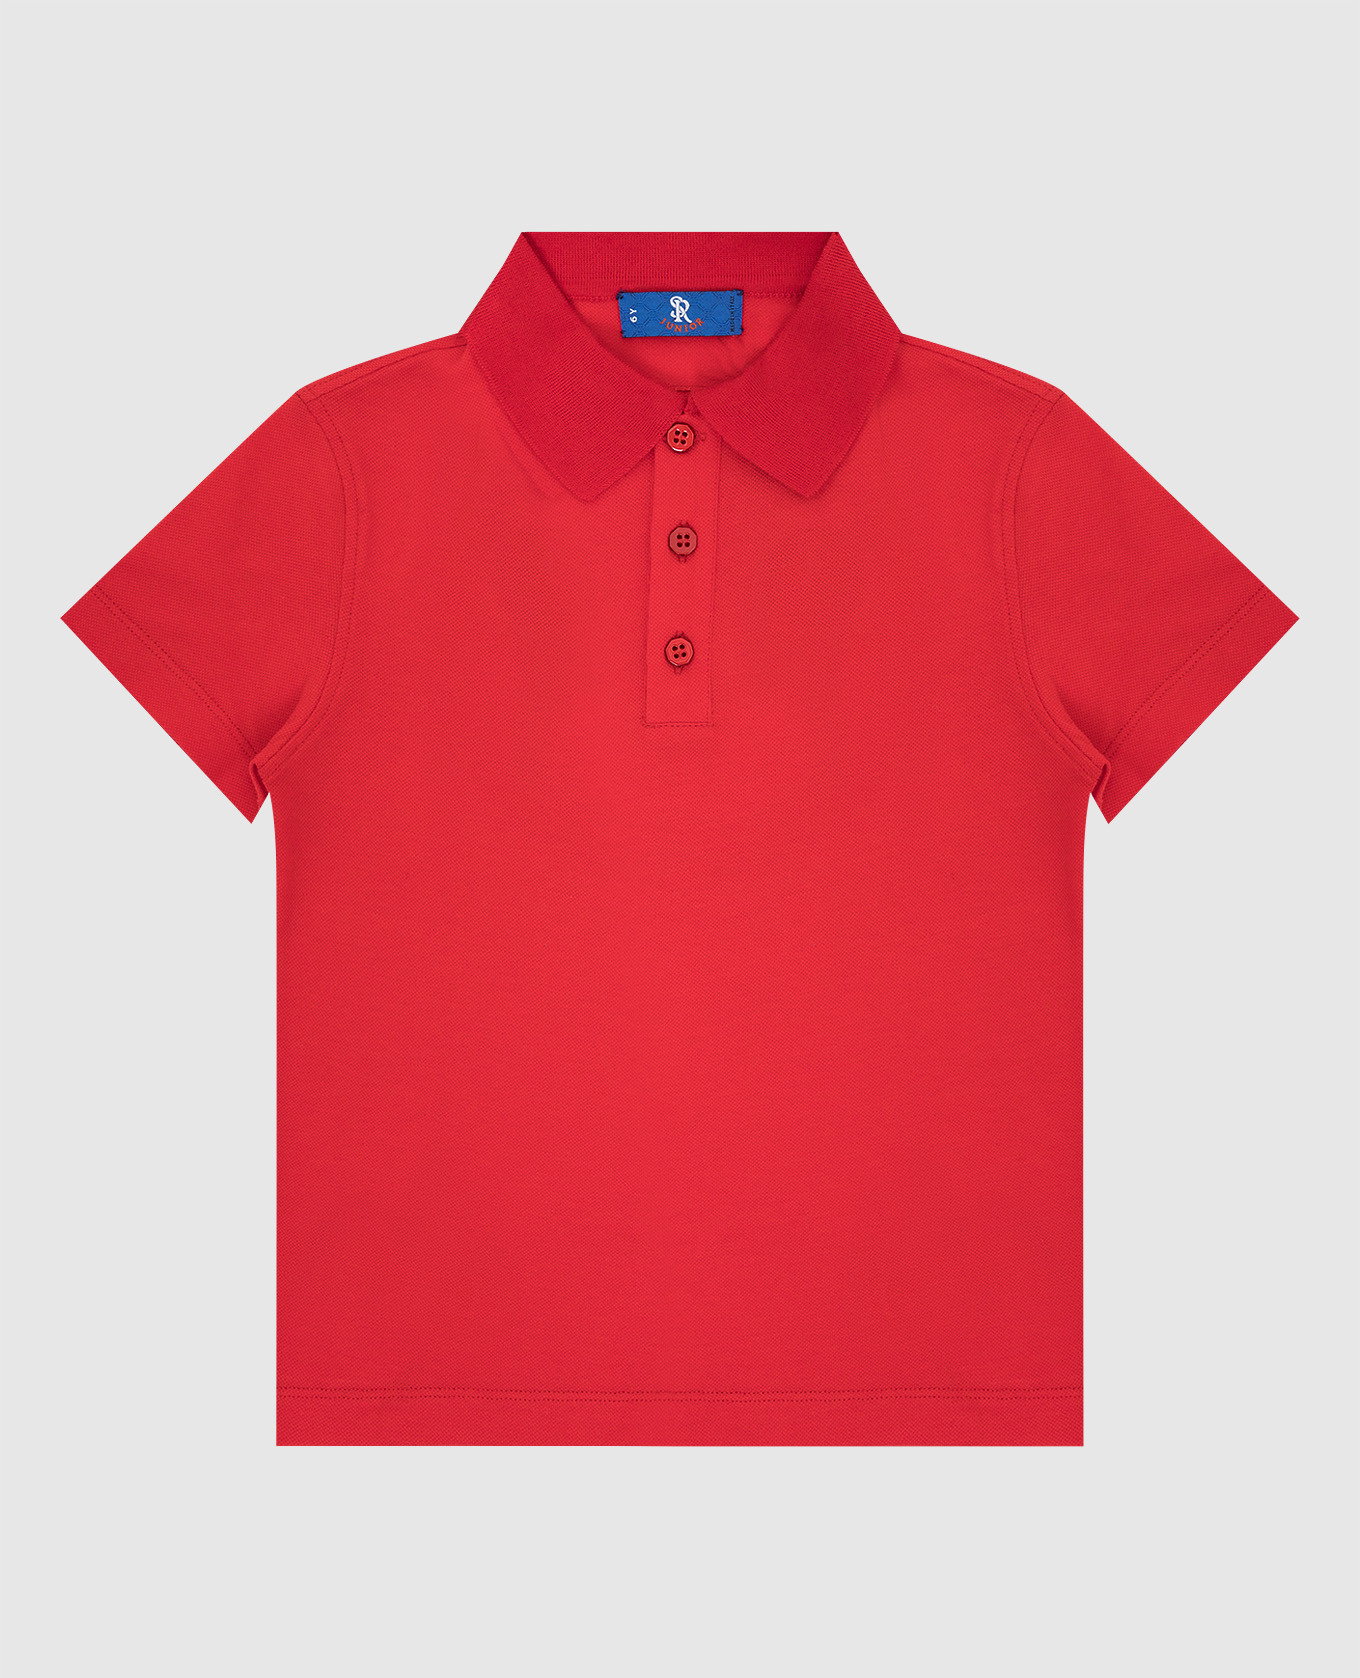 Children's red polo with embroidery